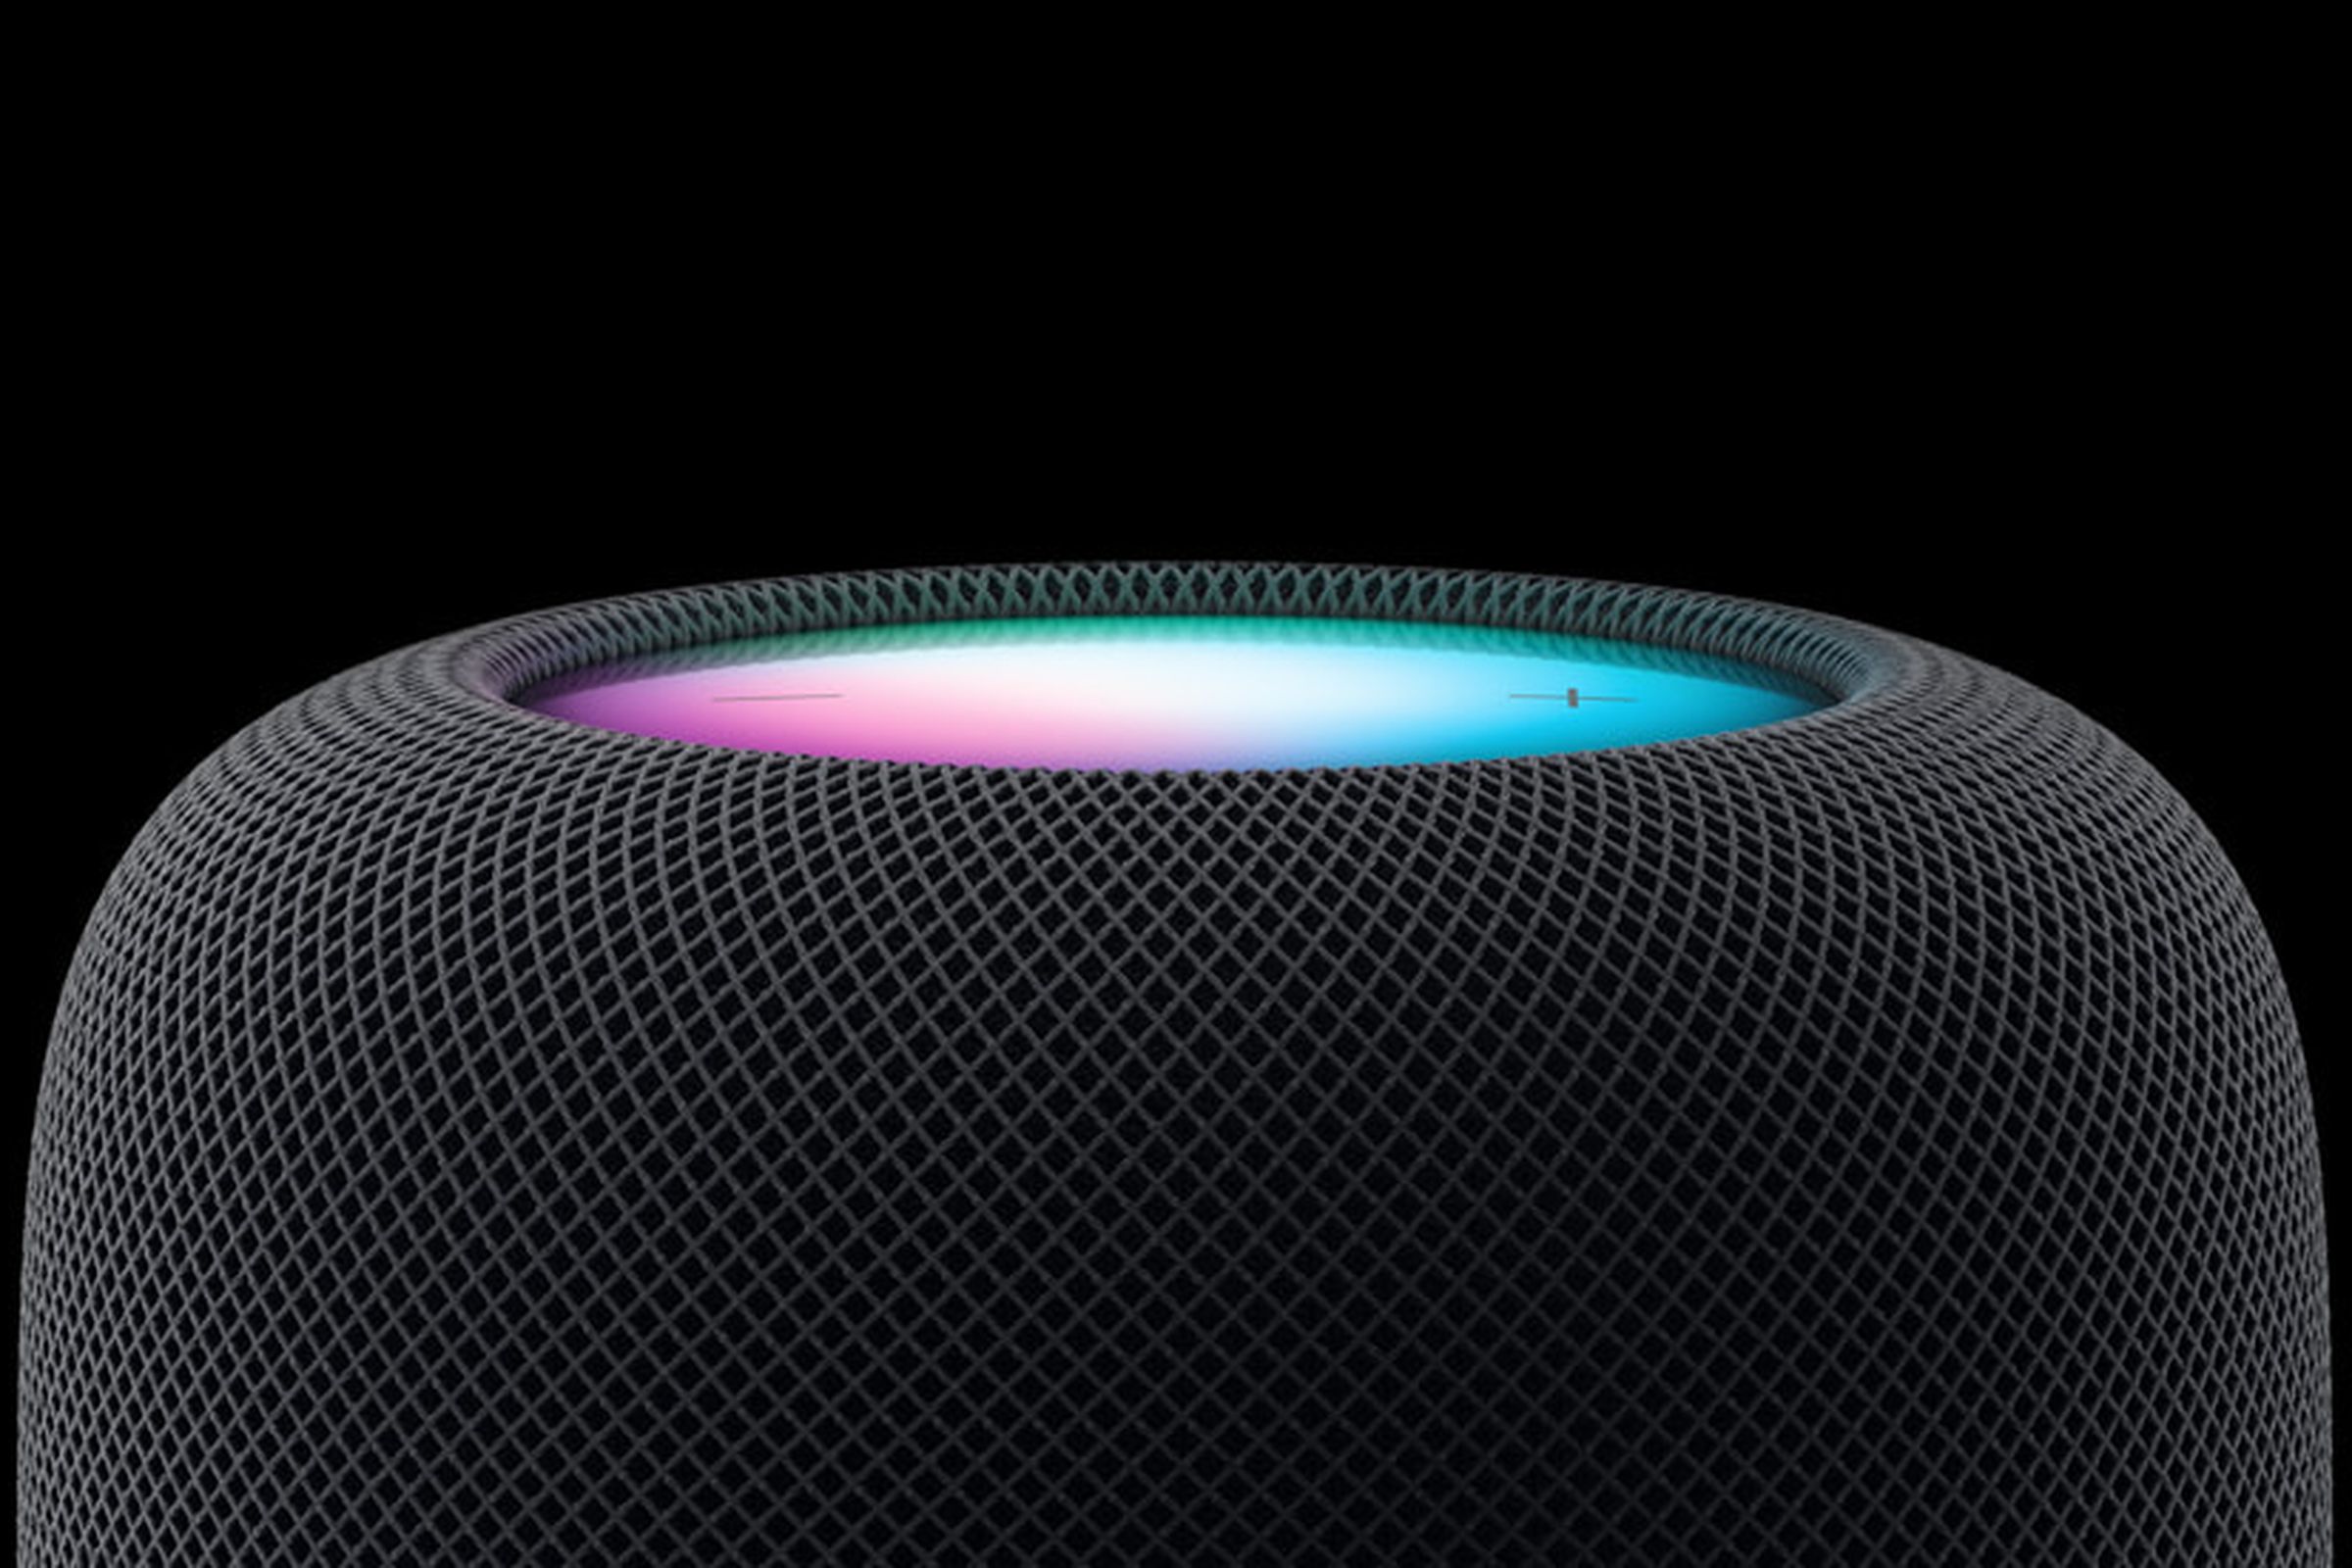 A stock photo of the new HomePod